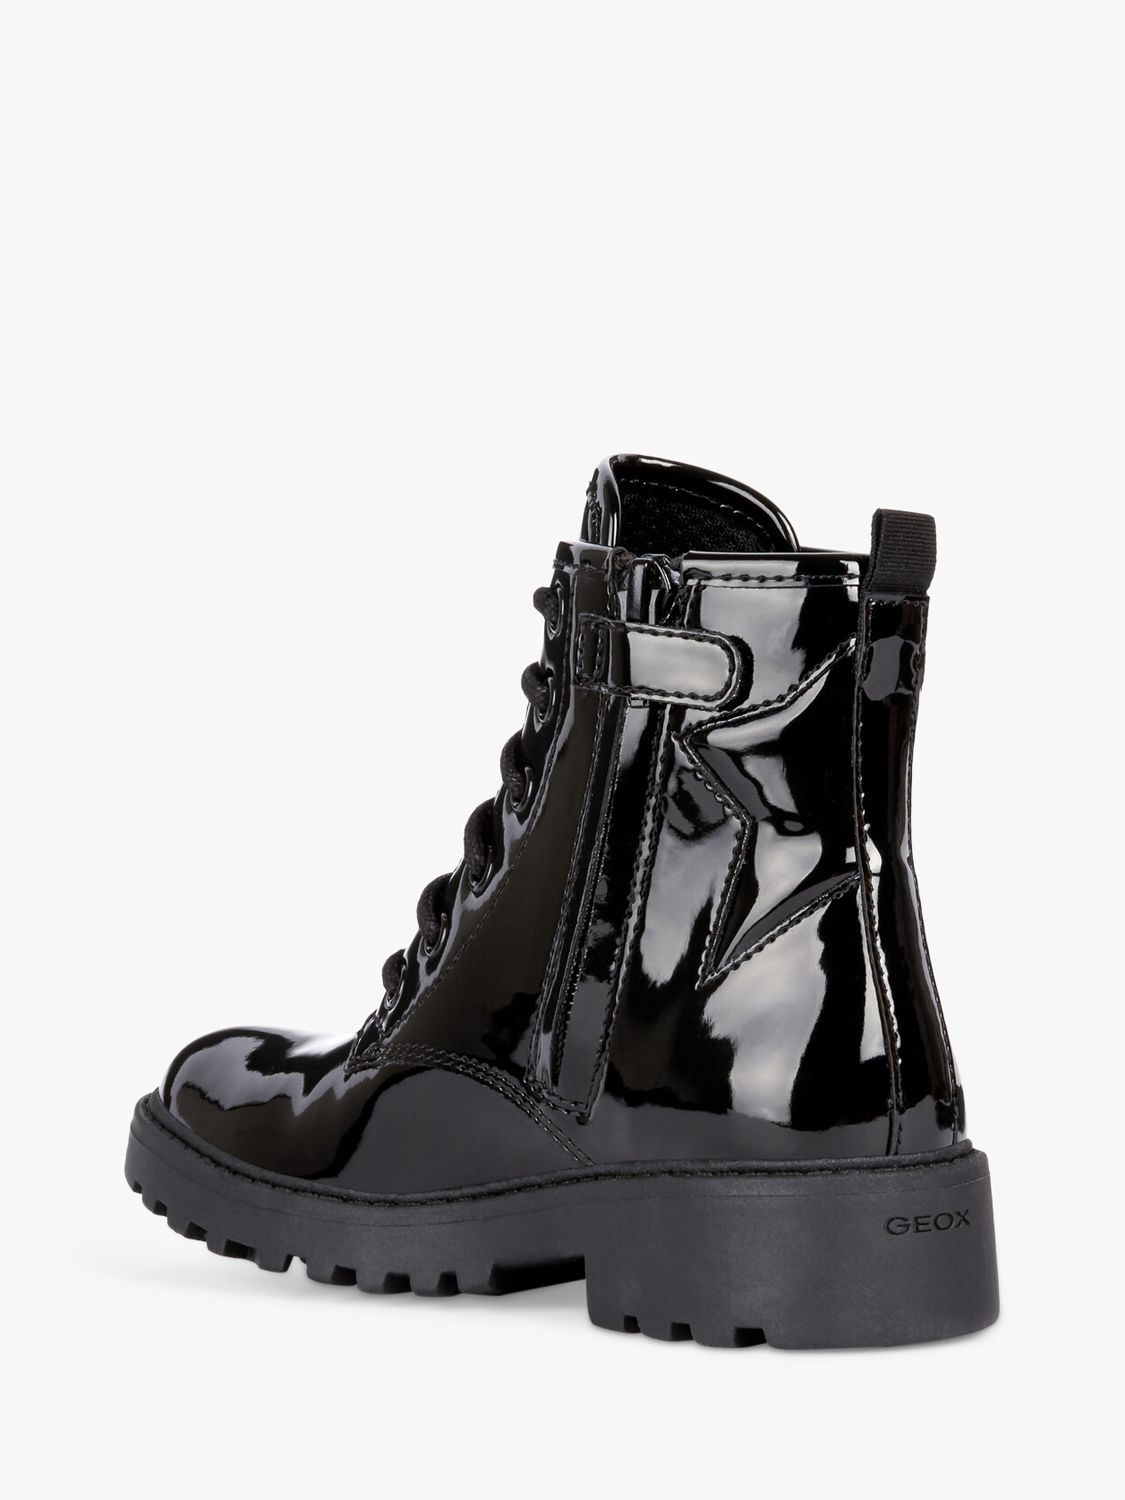 Geox Kids' Casey Patent Ankle Boots, Black at John Lewis & Partners